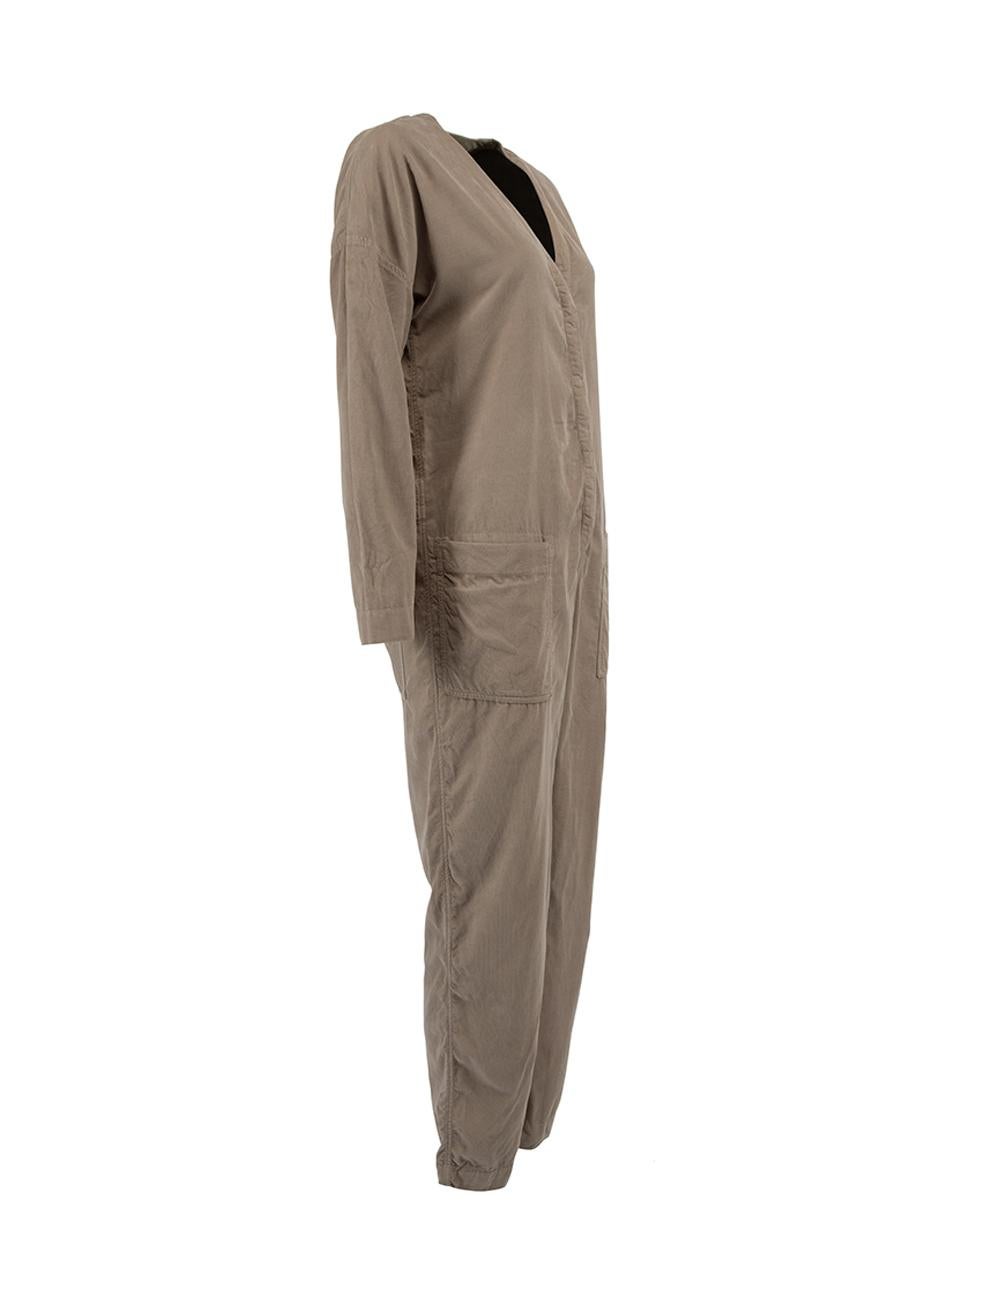 CONDITION is Very good. Hardly any visible wear to jumpsuit is evident. Very minor loose threads around jumpsuit is seen on this used James Perse designer resale item.  Details  Grey Corduroy Long sleeve jumpsuit V neckline Front button closure